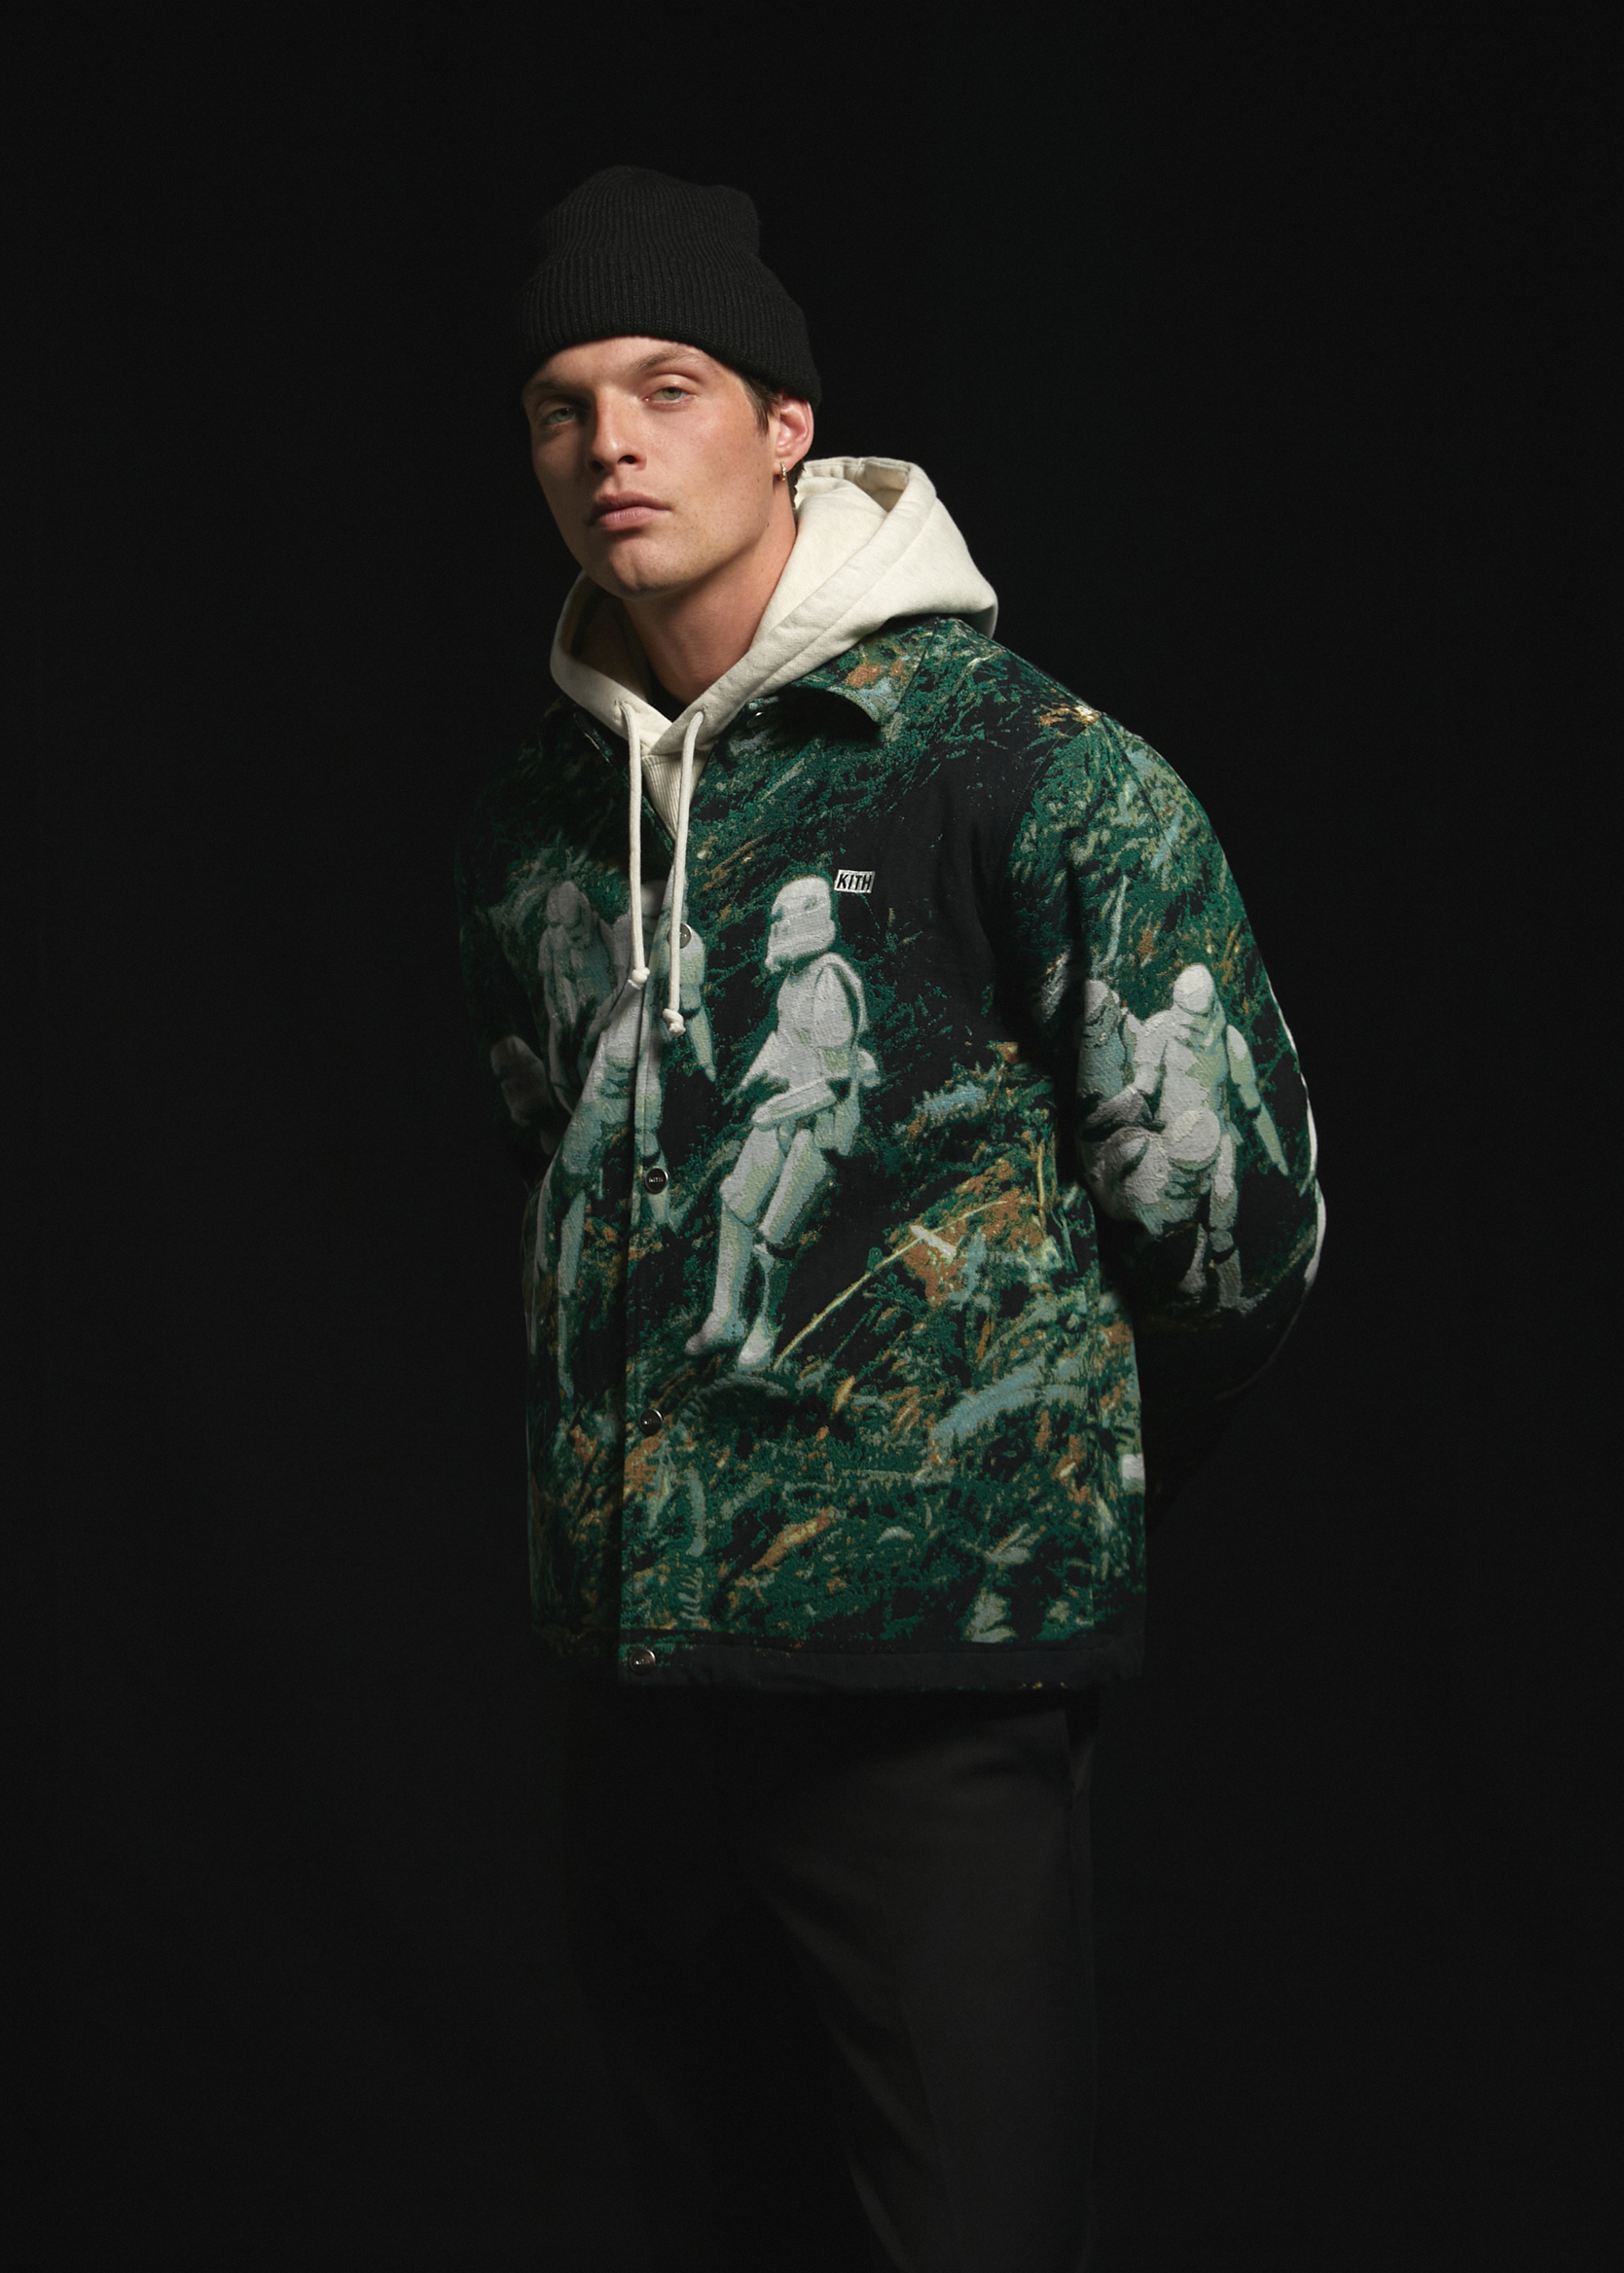 Take A Look At The Kith x Star Wars Collection - V Magazine